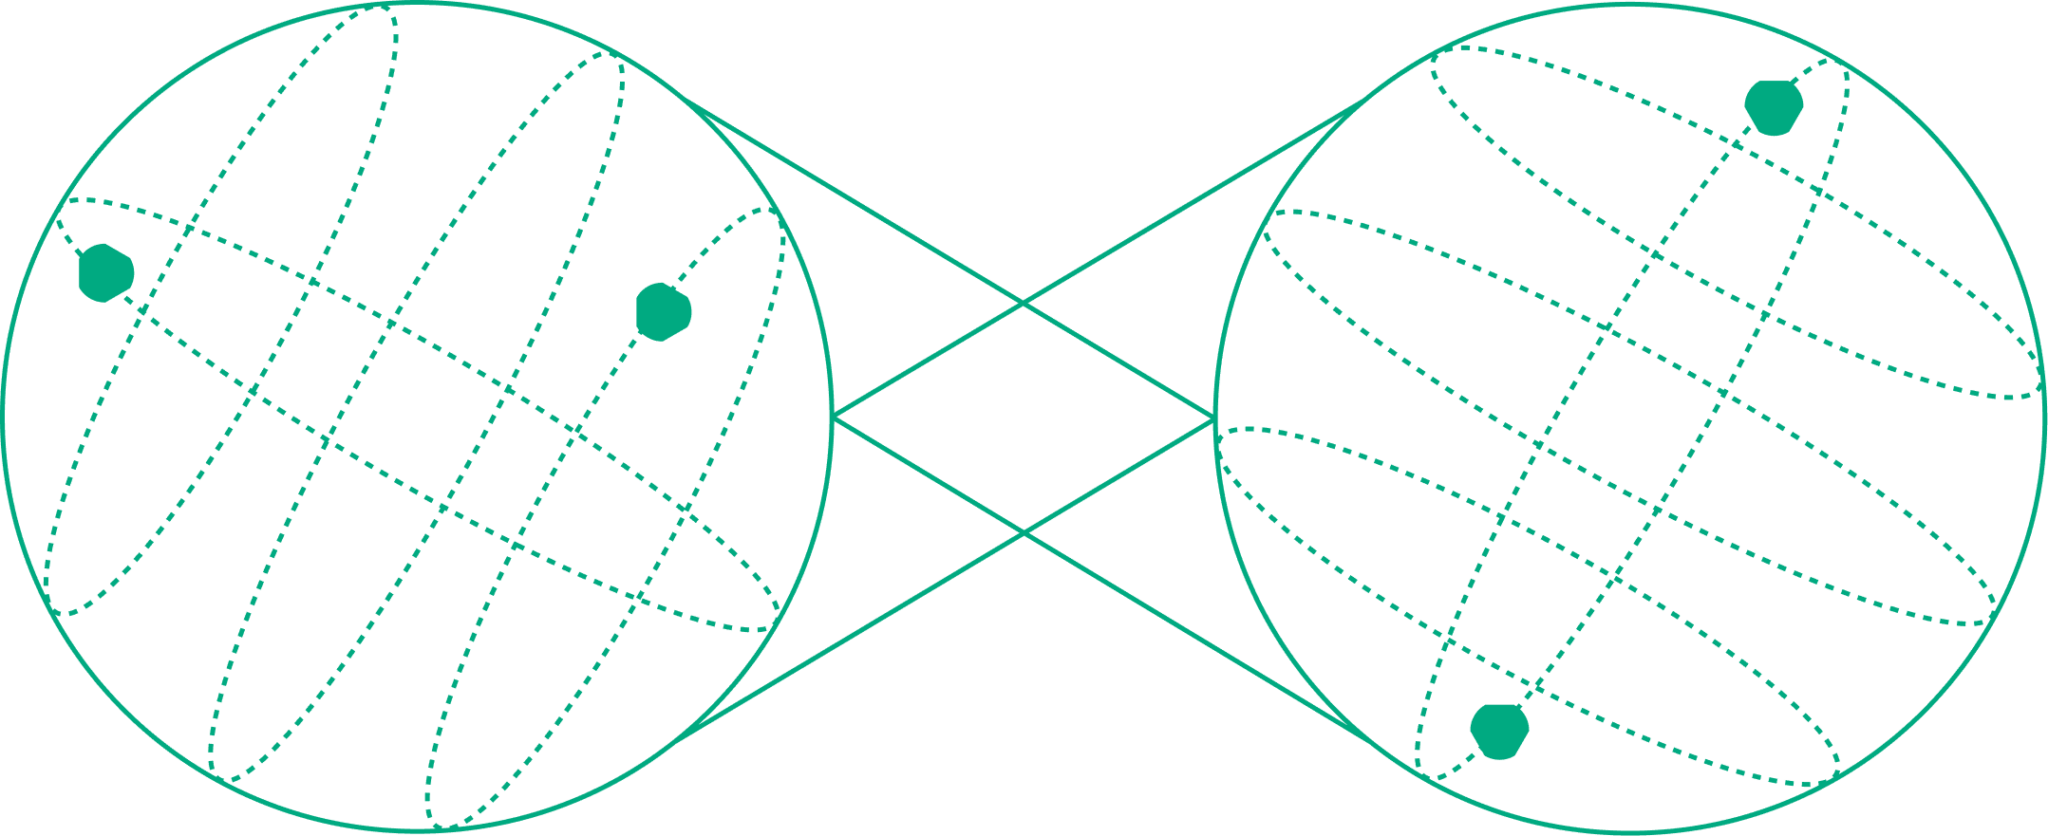 Quantum entanglement, in essence, allows two or more qubits to become so intimately correlated that the state of one qubit depends on the state of the other, regardless of the distance separating them. This phenomenon defies our usual understanding of the world and has no real analogue in classical physics.